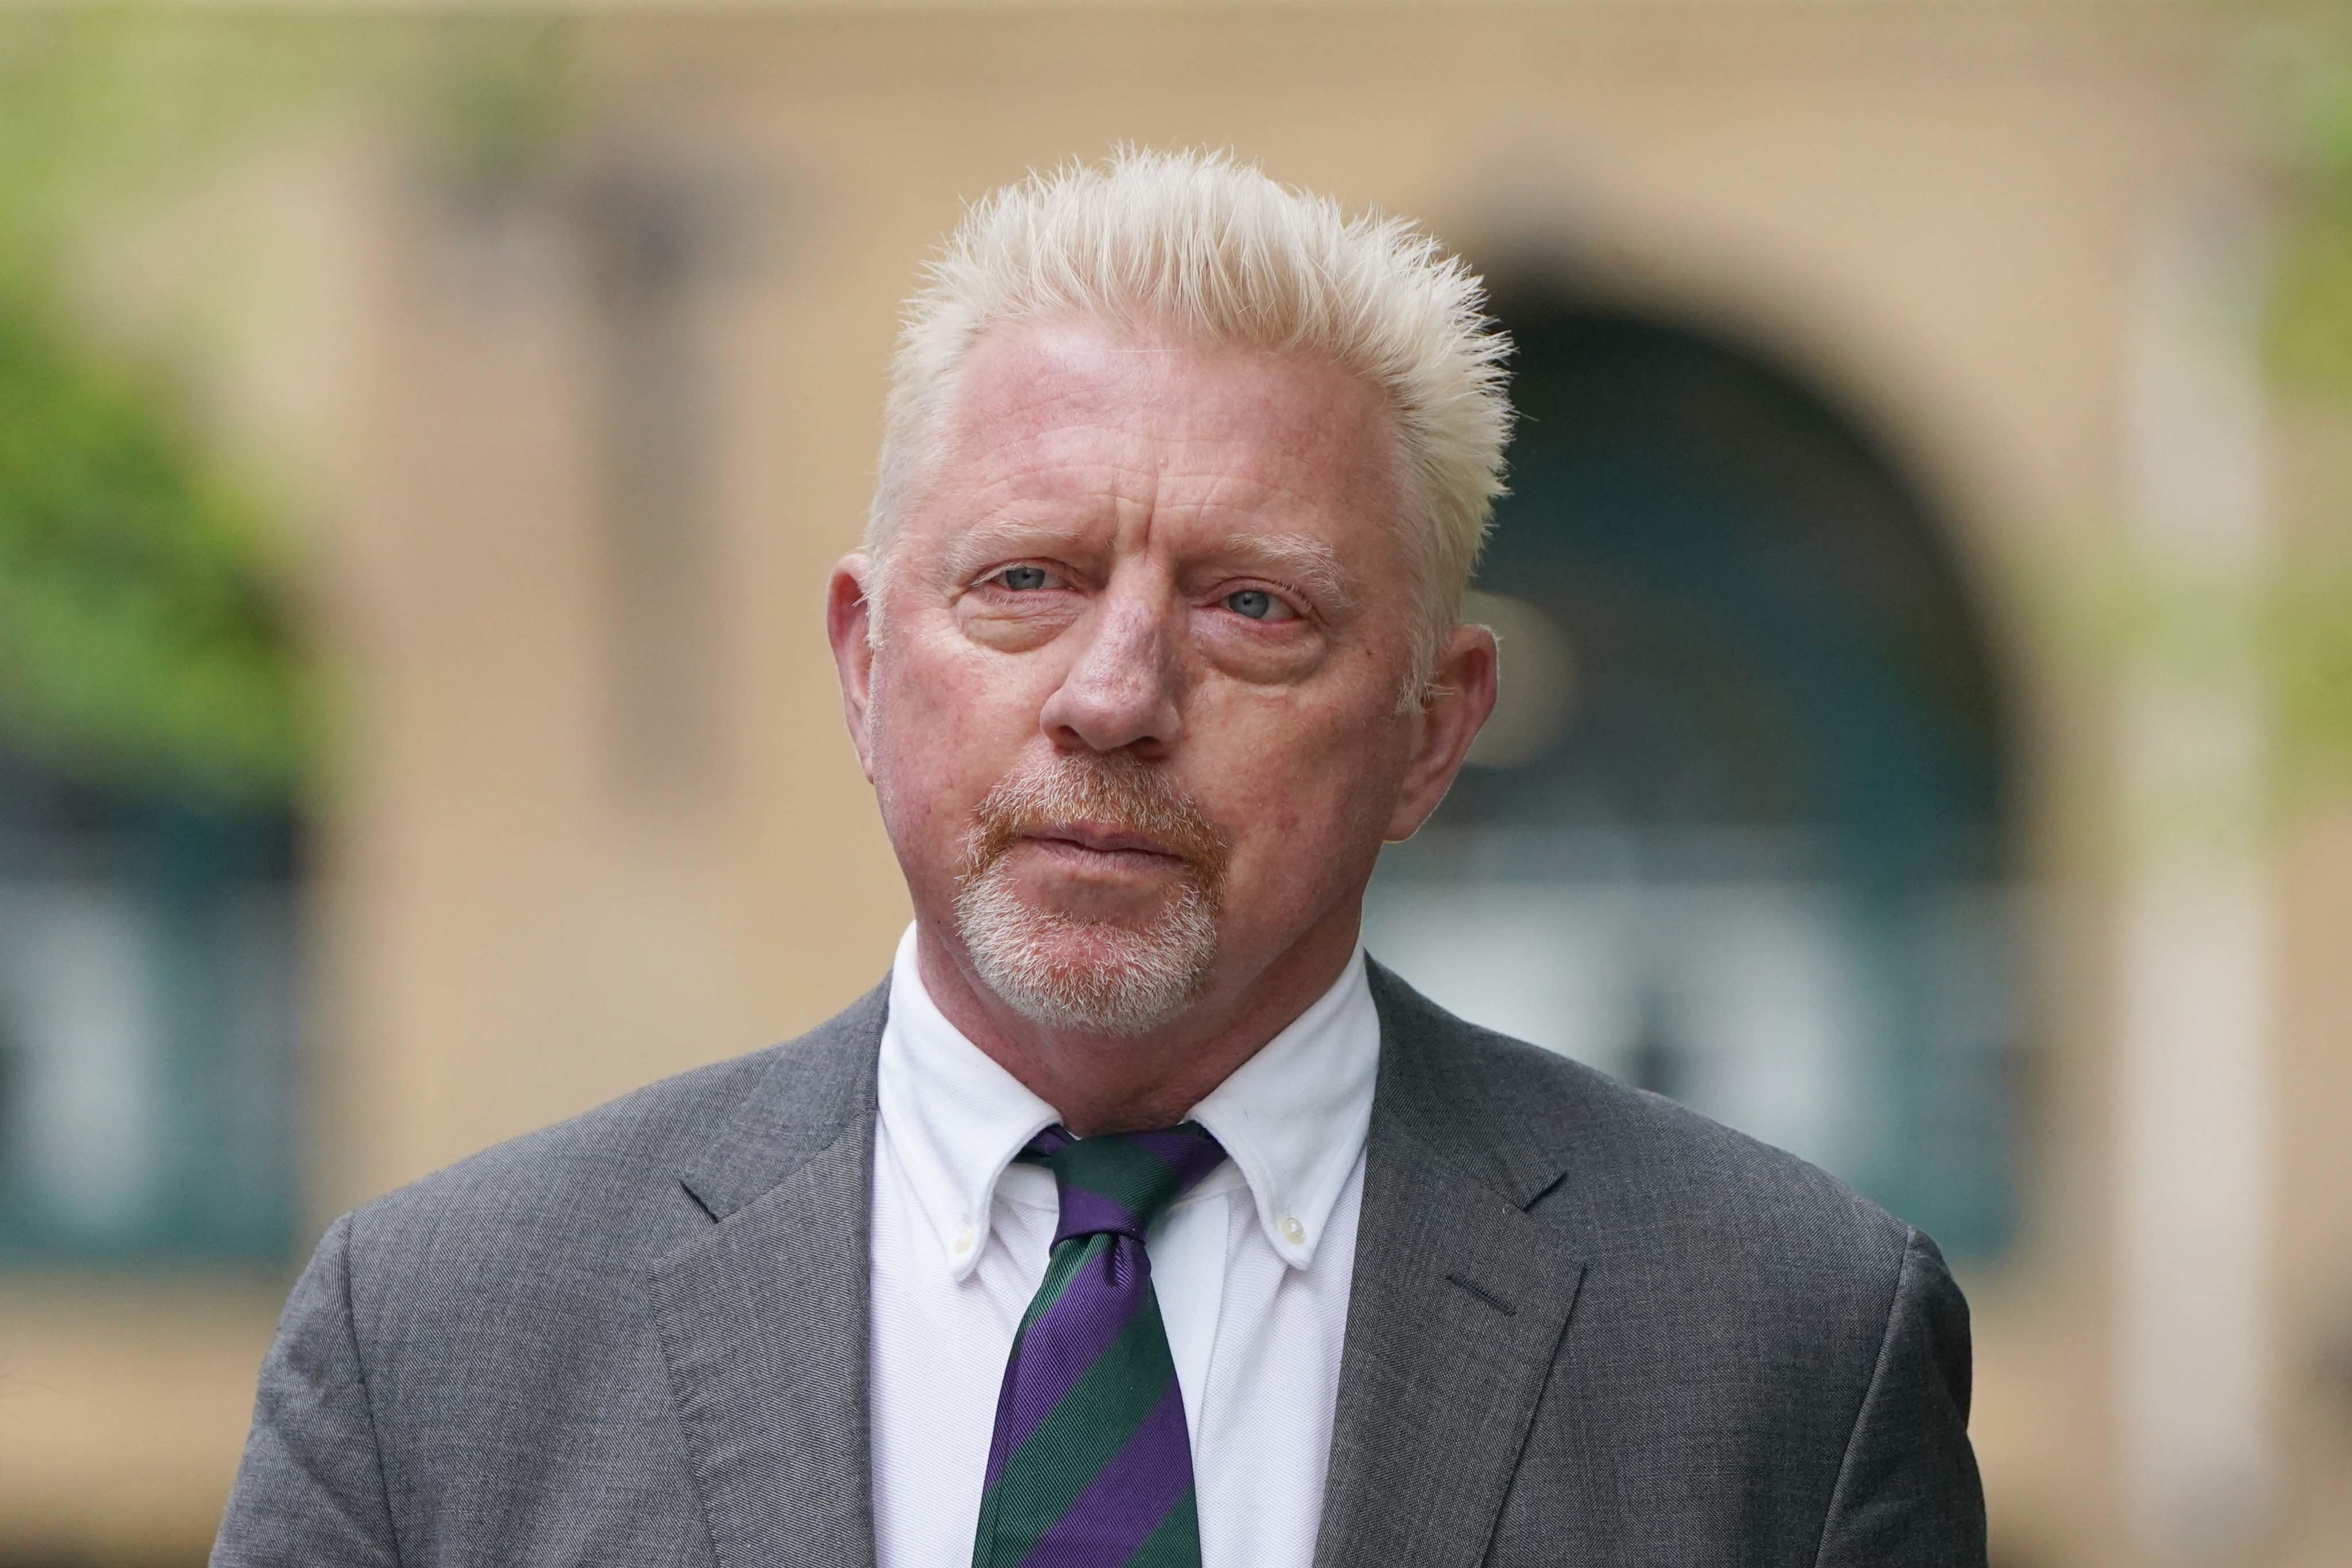 Boris Becker missed Wimbledon this year as he was not allowed in the UK following his prison stay and deportation from the country (Kirsty O’Connor/PA)